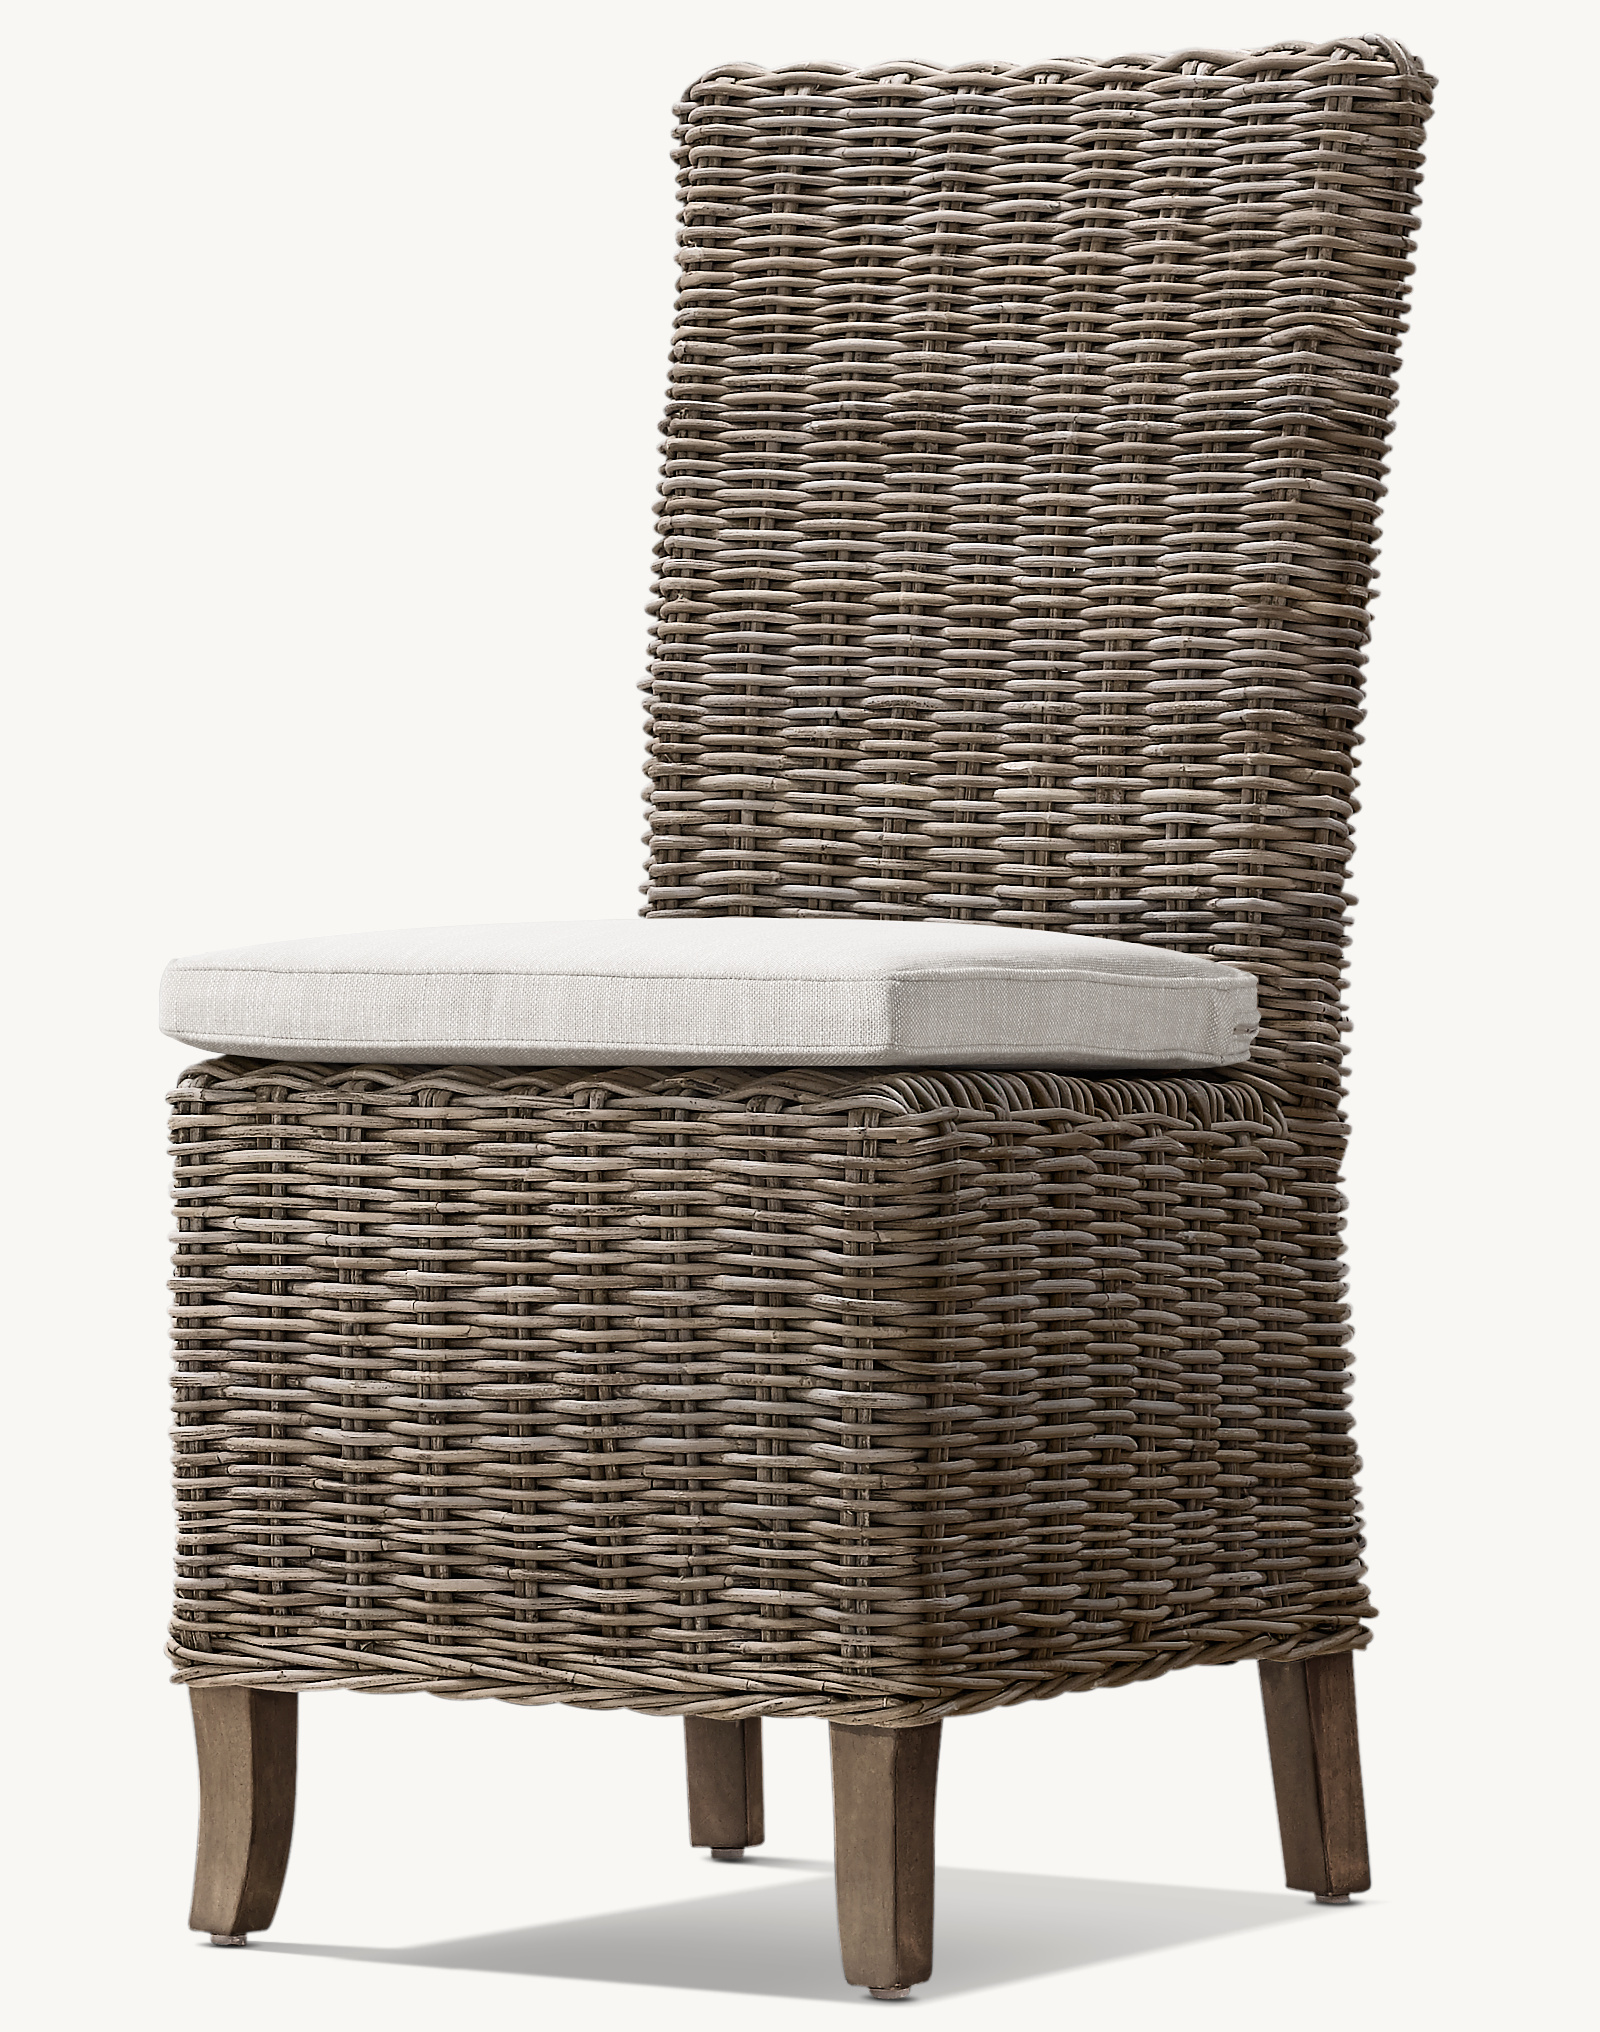 Shown in Terra. Cushion (sold separately) shown in Dove Perennials&#174; Performance Textured Linen Weave.